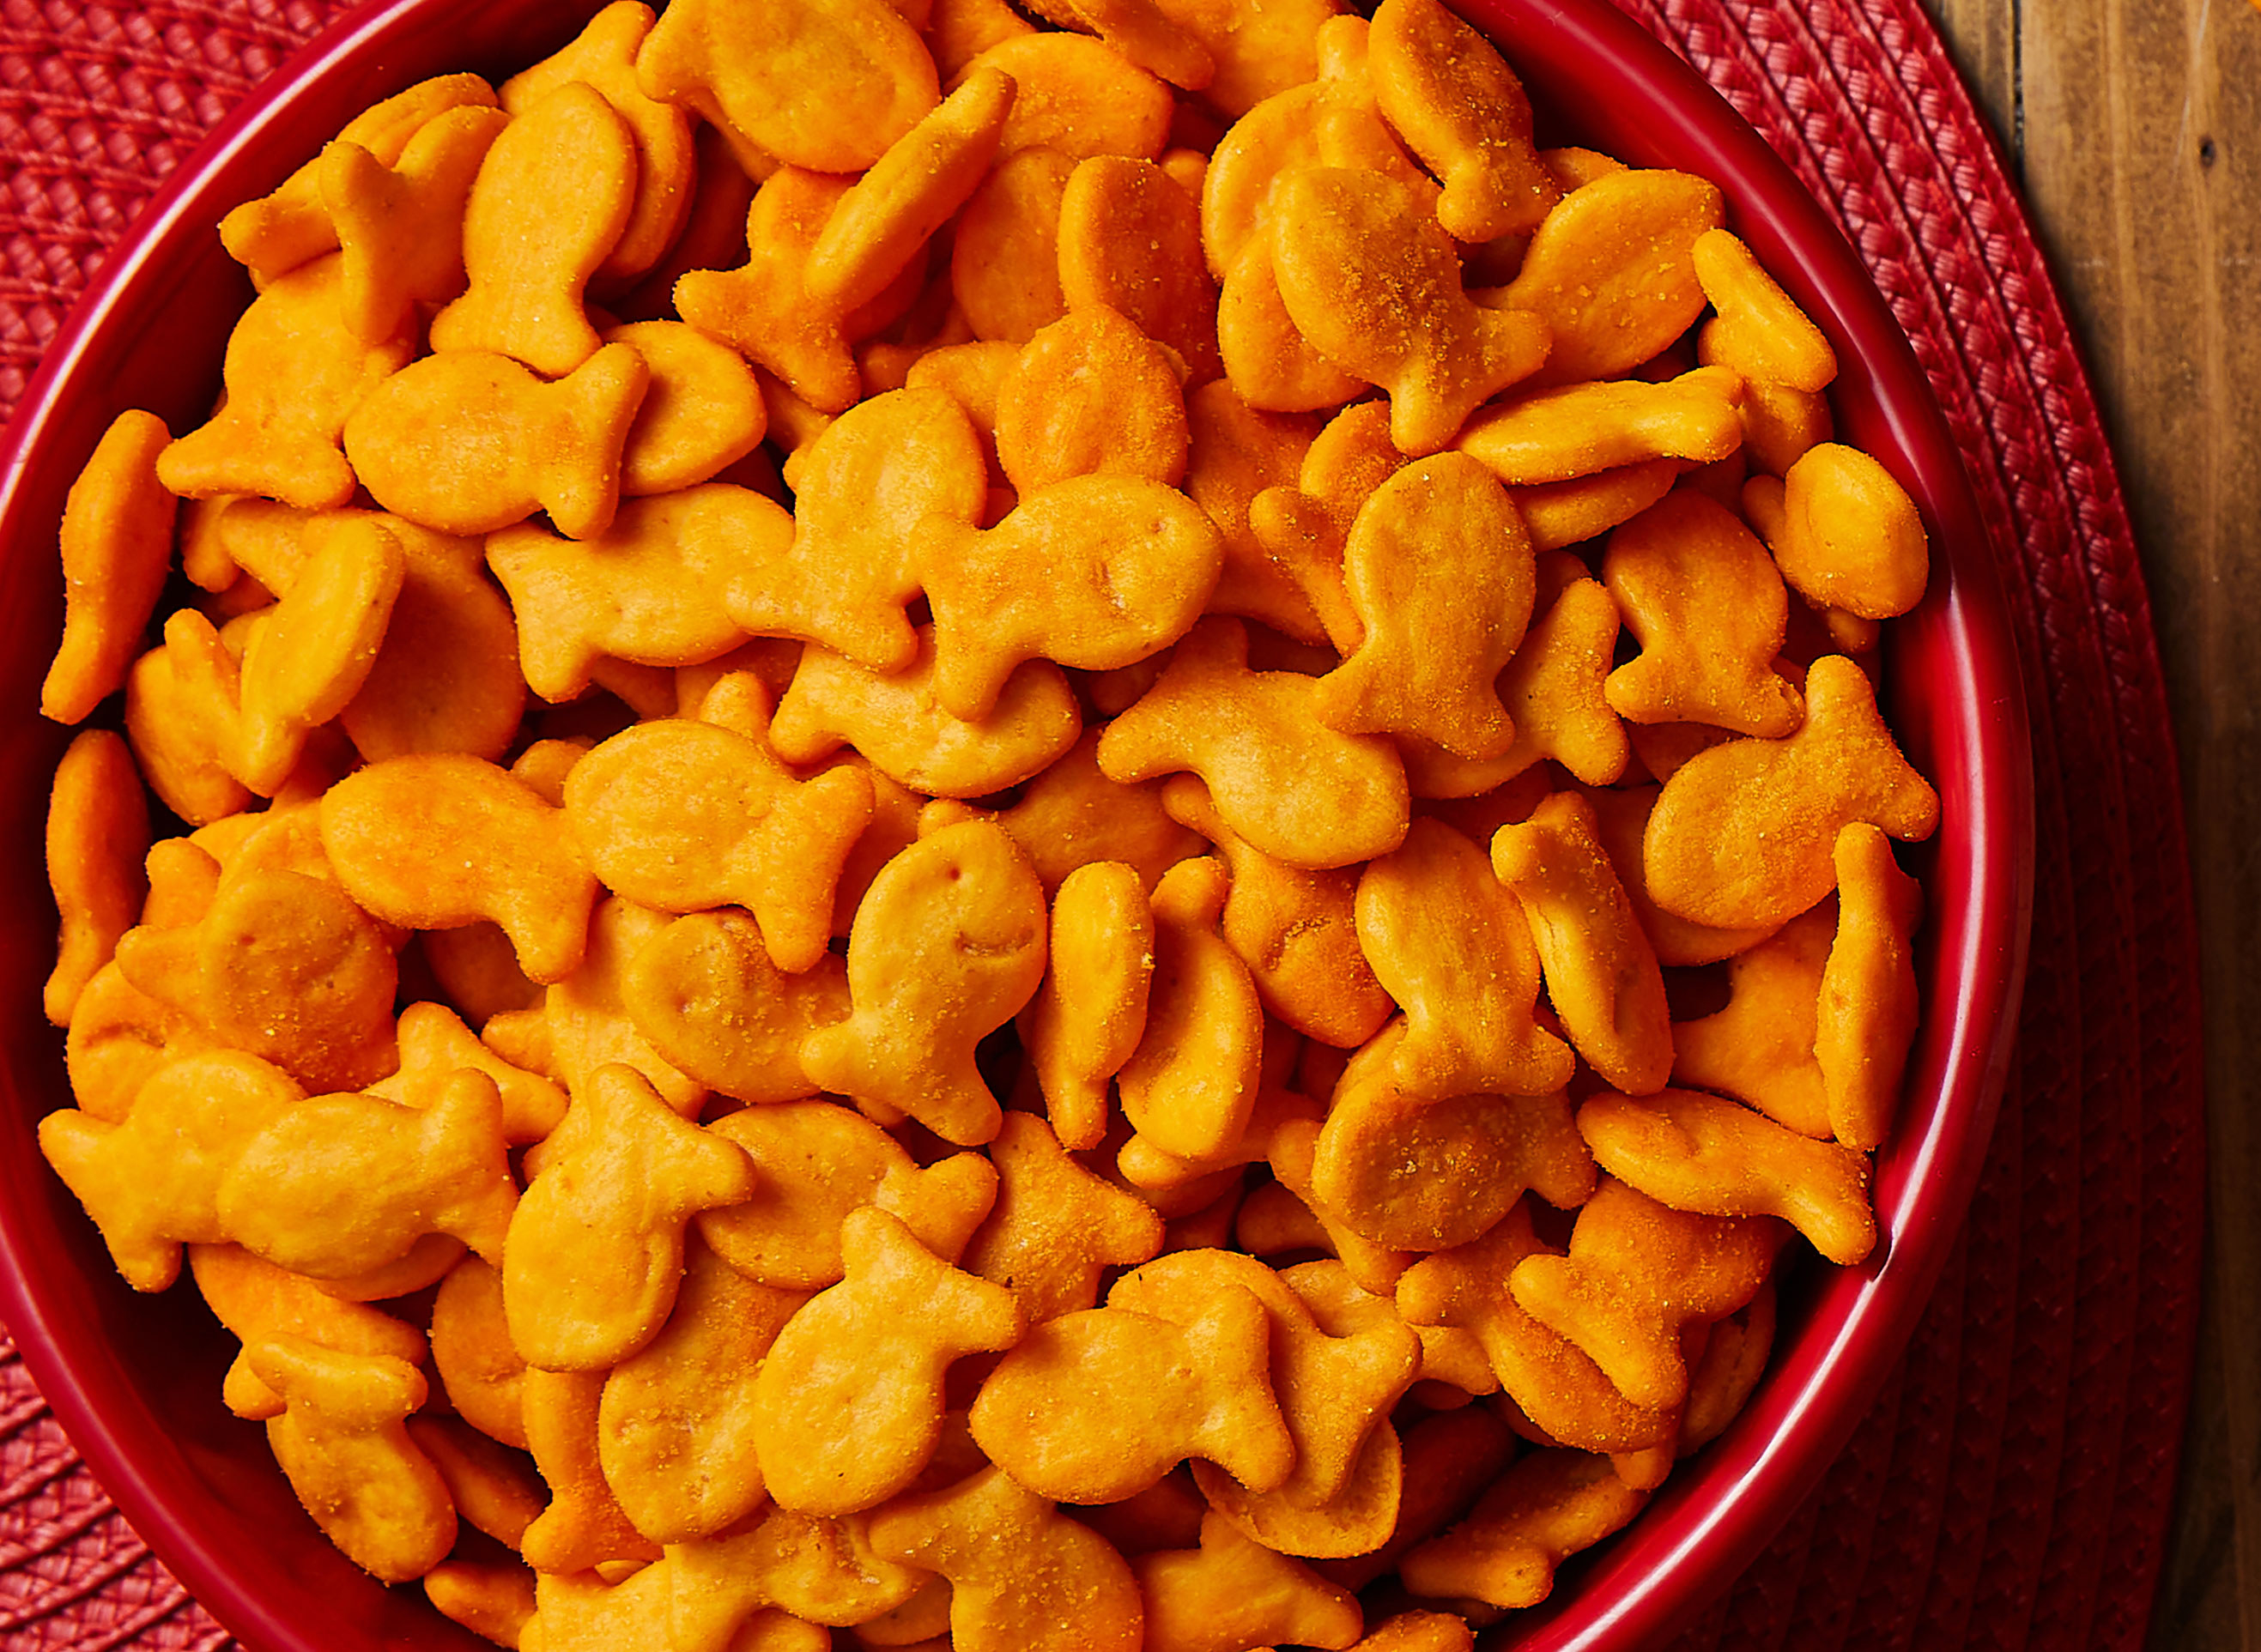 An even more close-up shot of the bowl of Goldfish